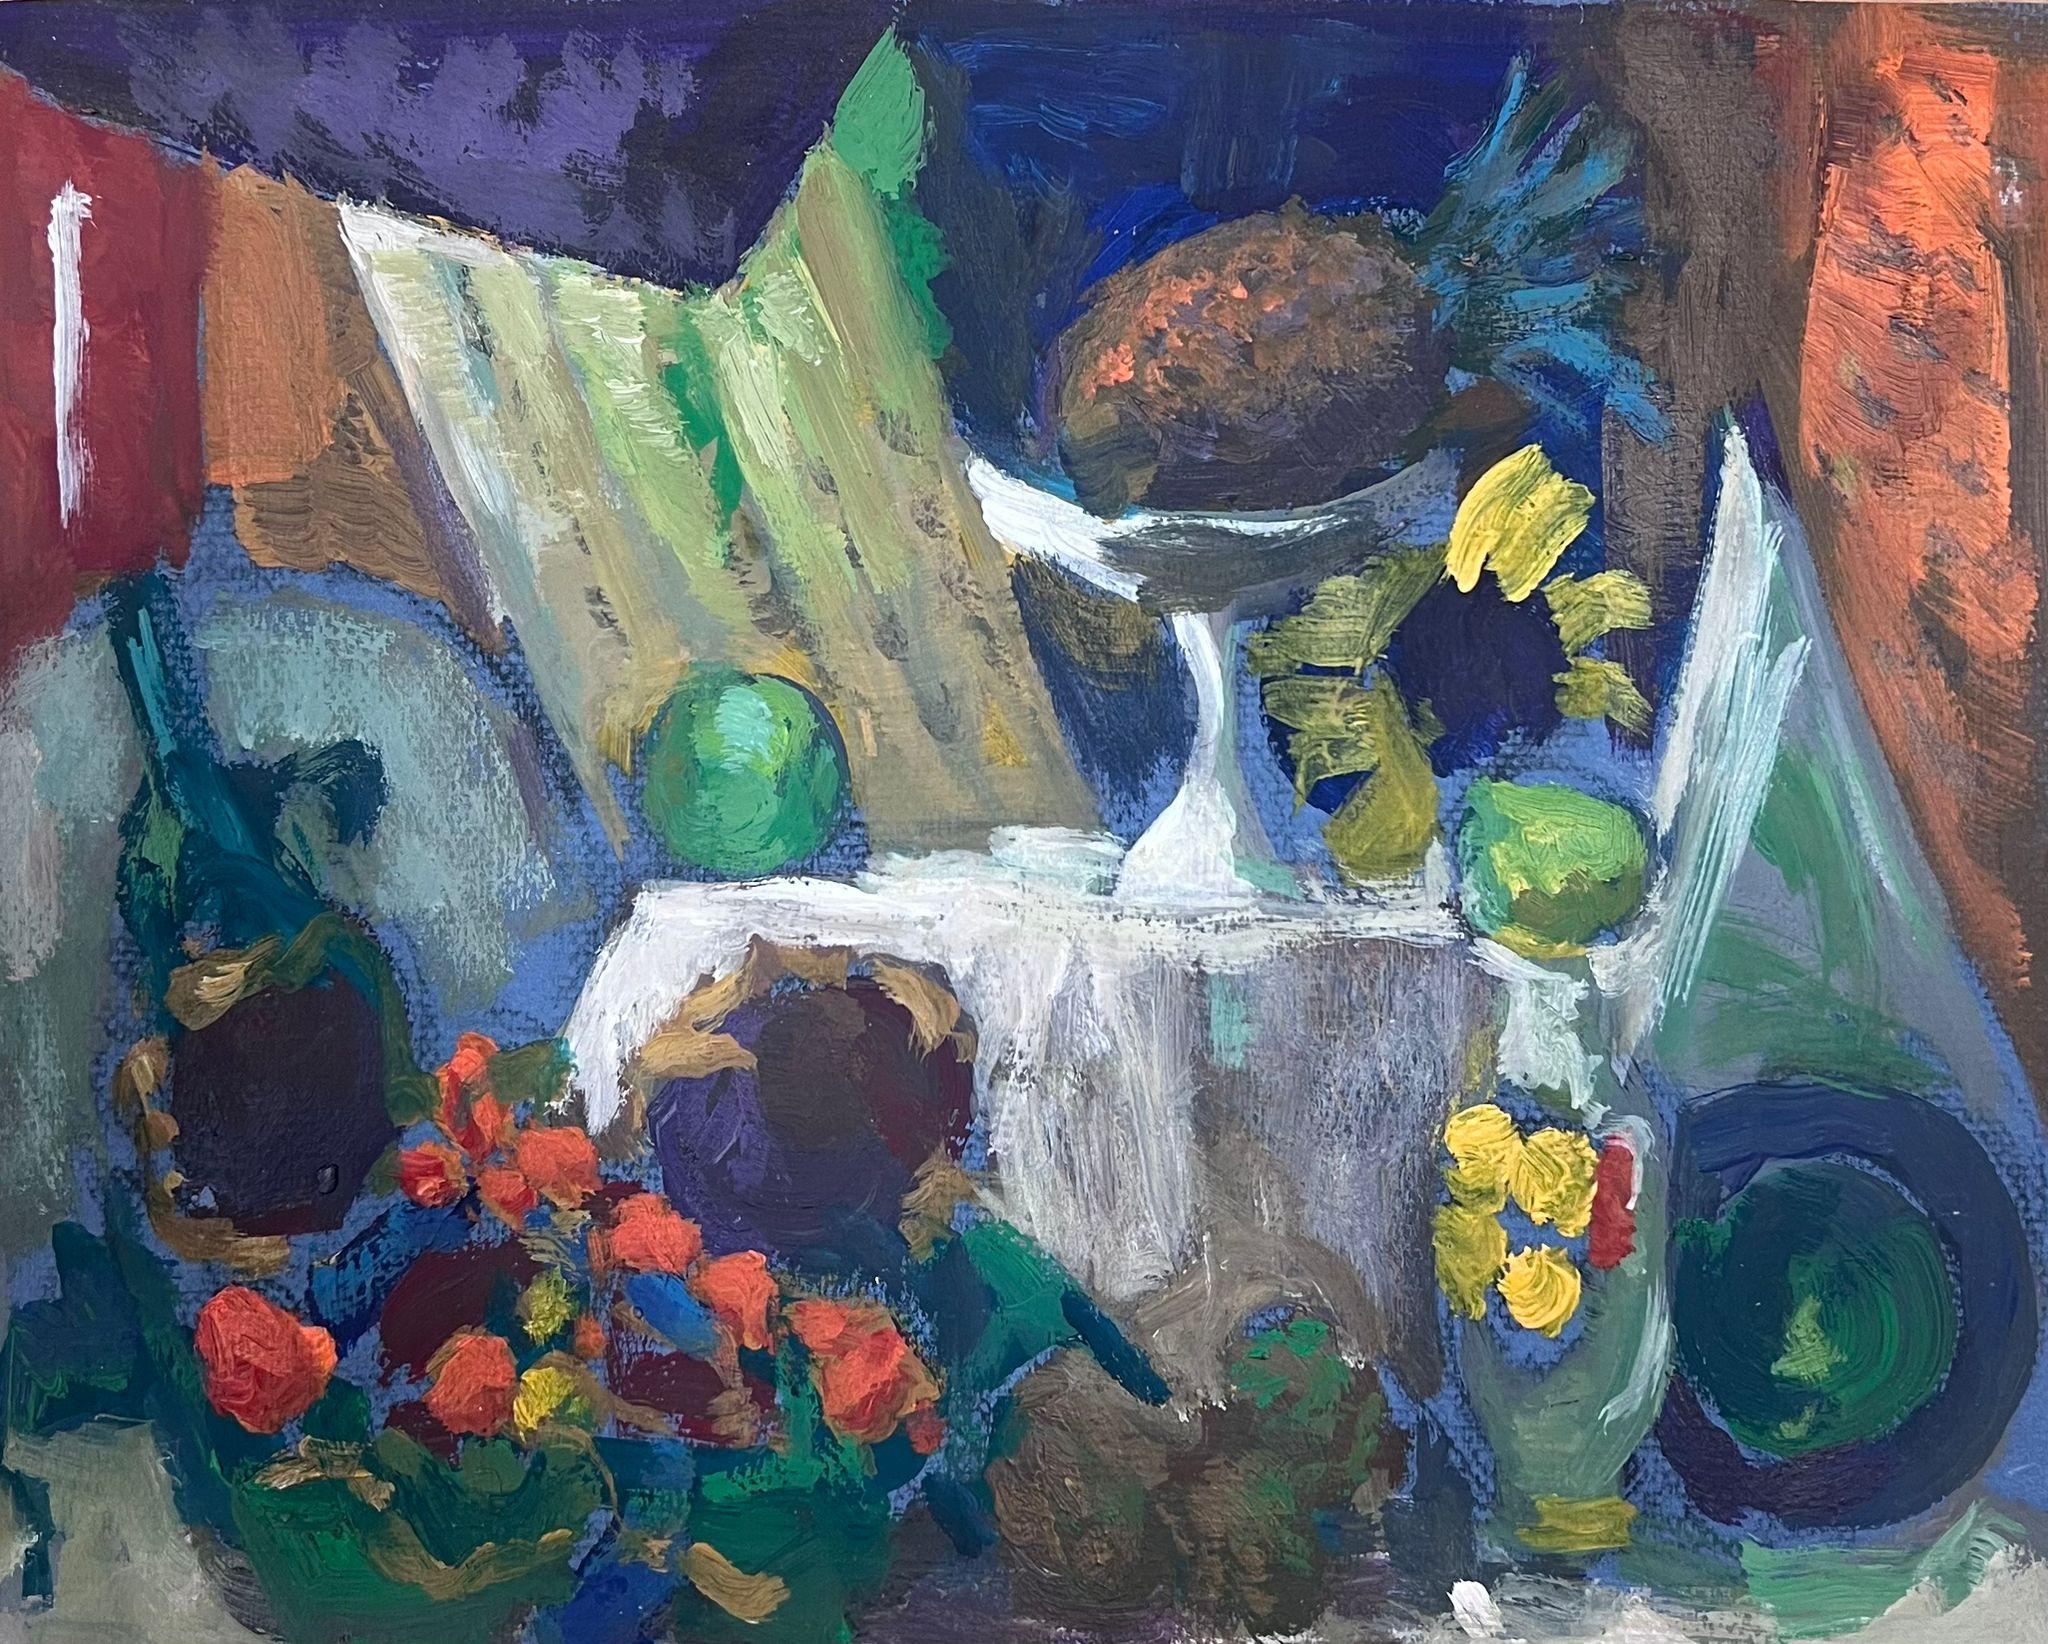 Guy Nicod Interior Painting - 1970's French Modernist Still Life Table Ornaments Pineapples and Sunflowers